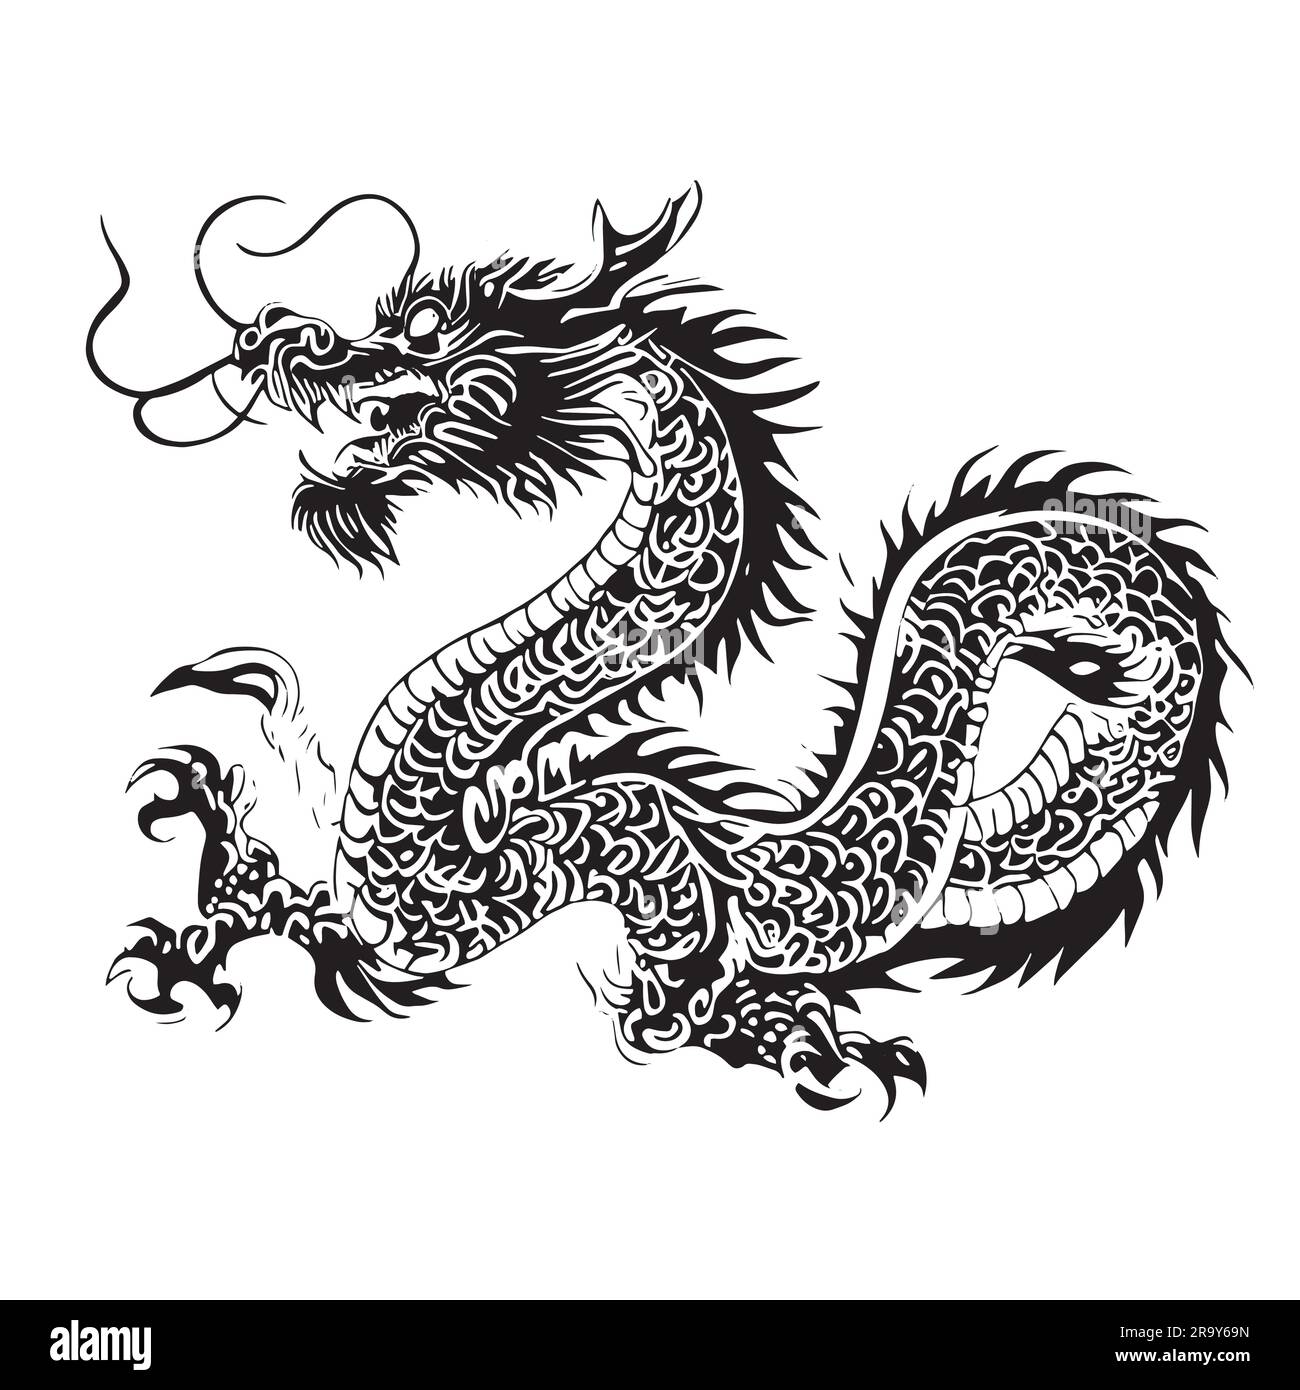 chinese dragon illustration in black color. Chinese dragon tattoo. Vector illustration. Isolated on white background. Stock Vector